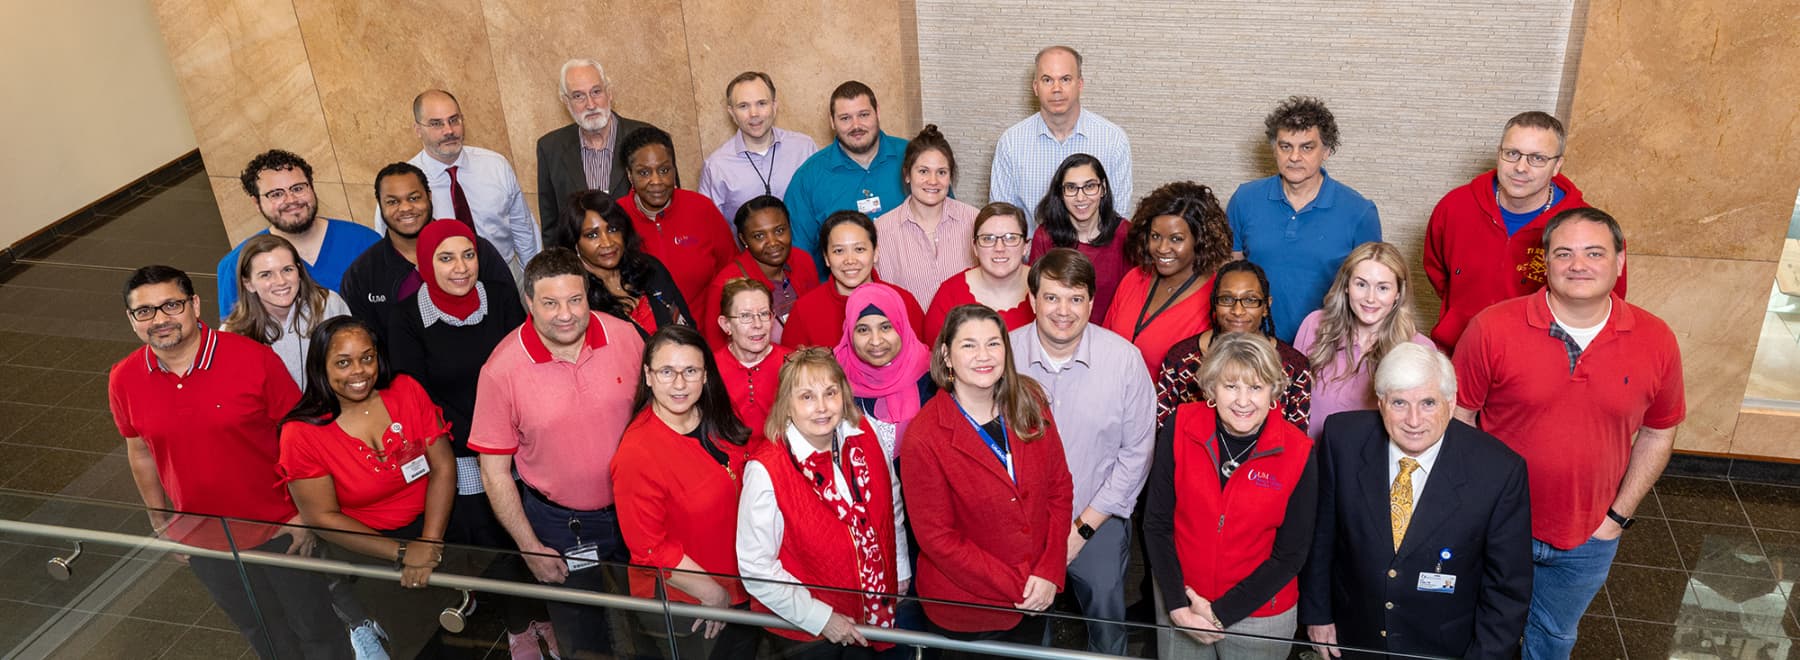 Group photo of Women's Health Research Center staff dressed in red